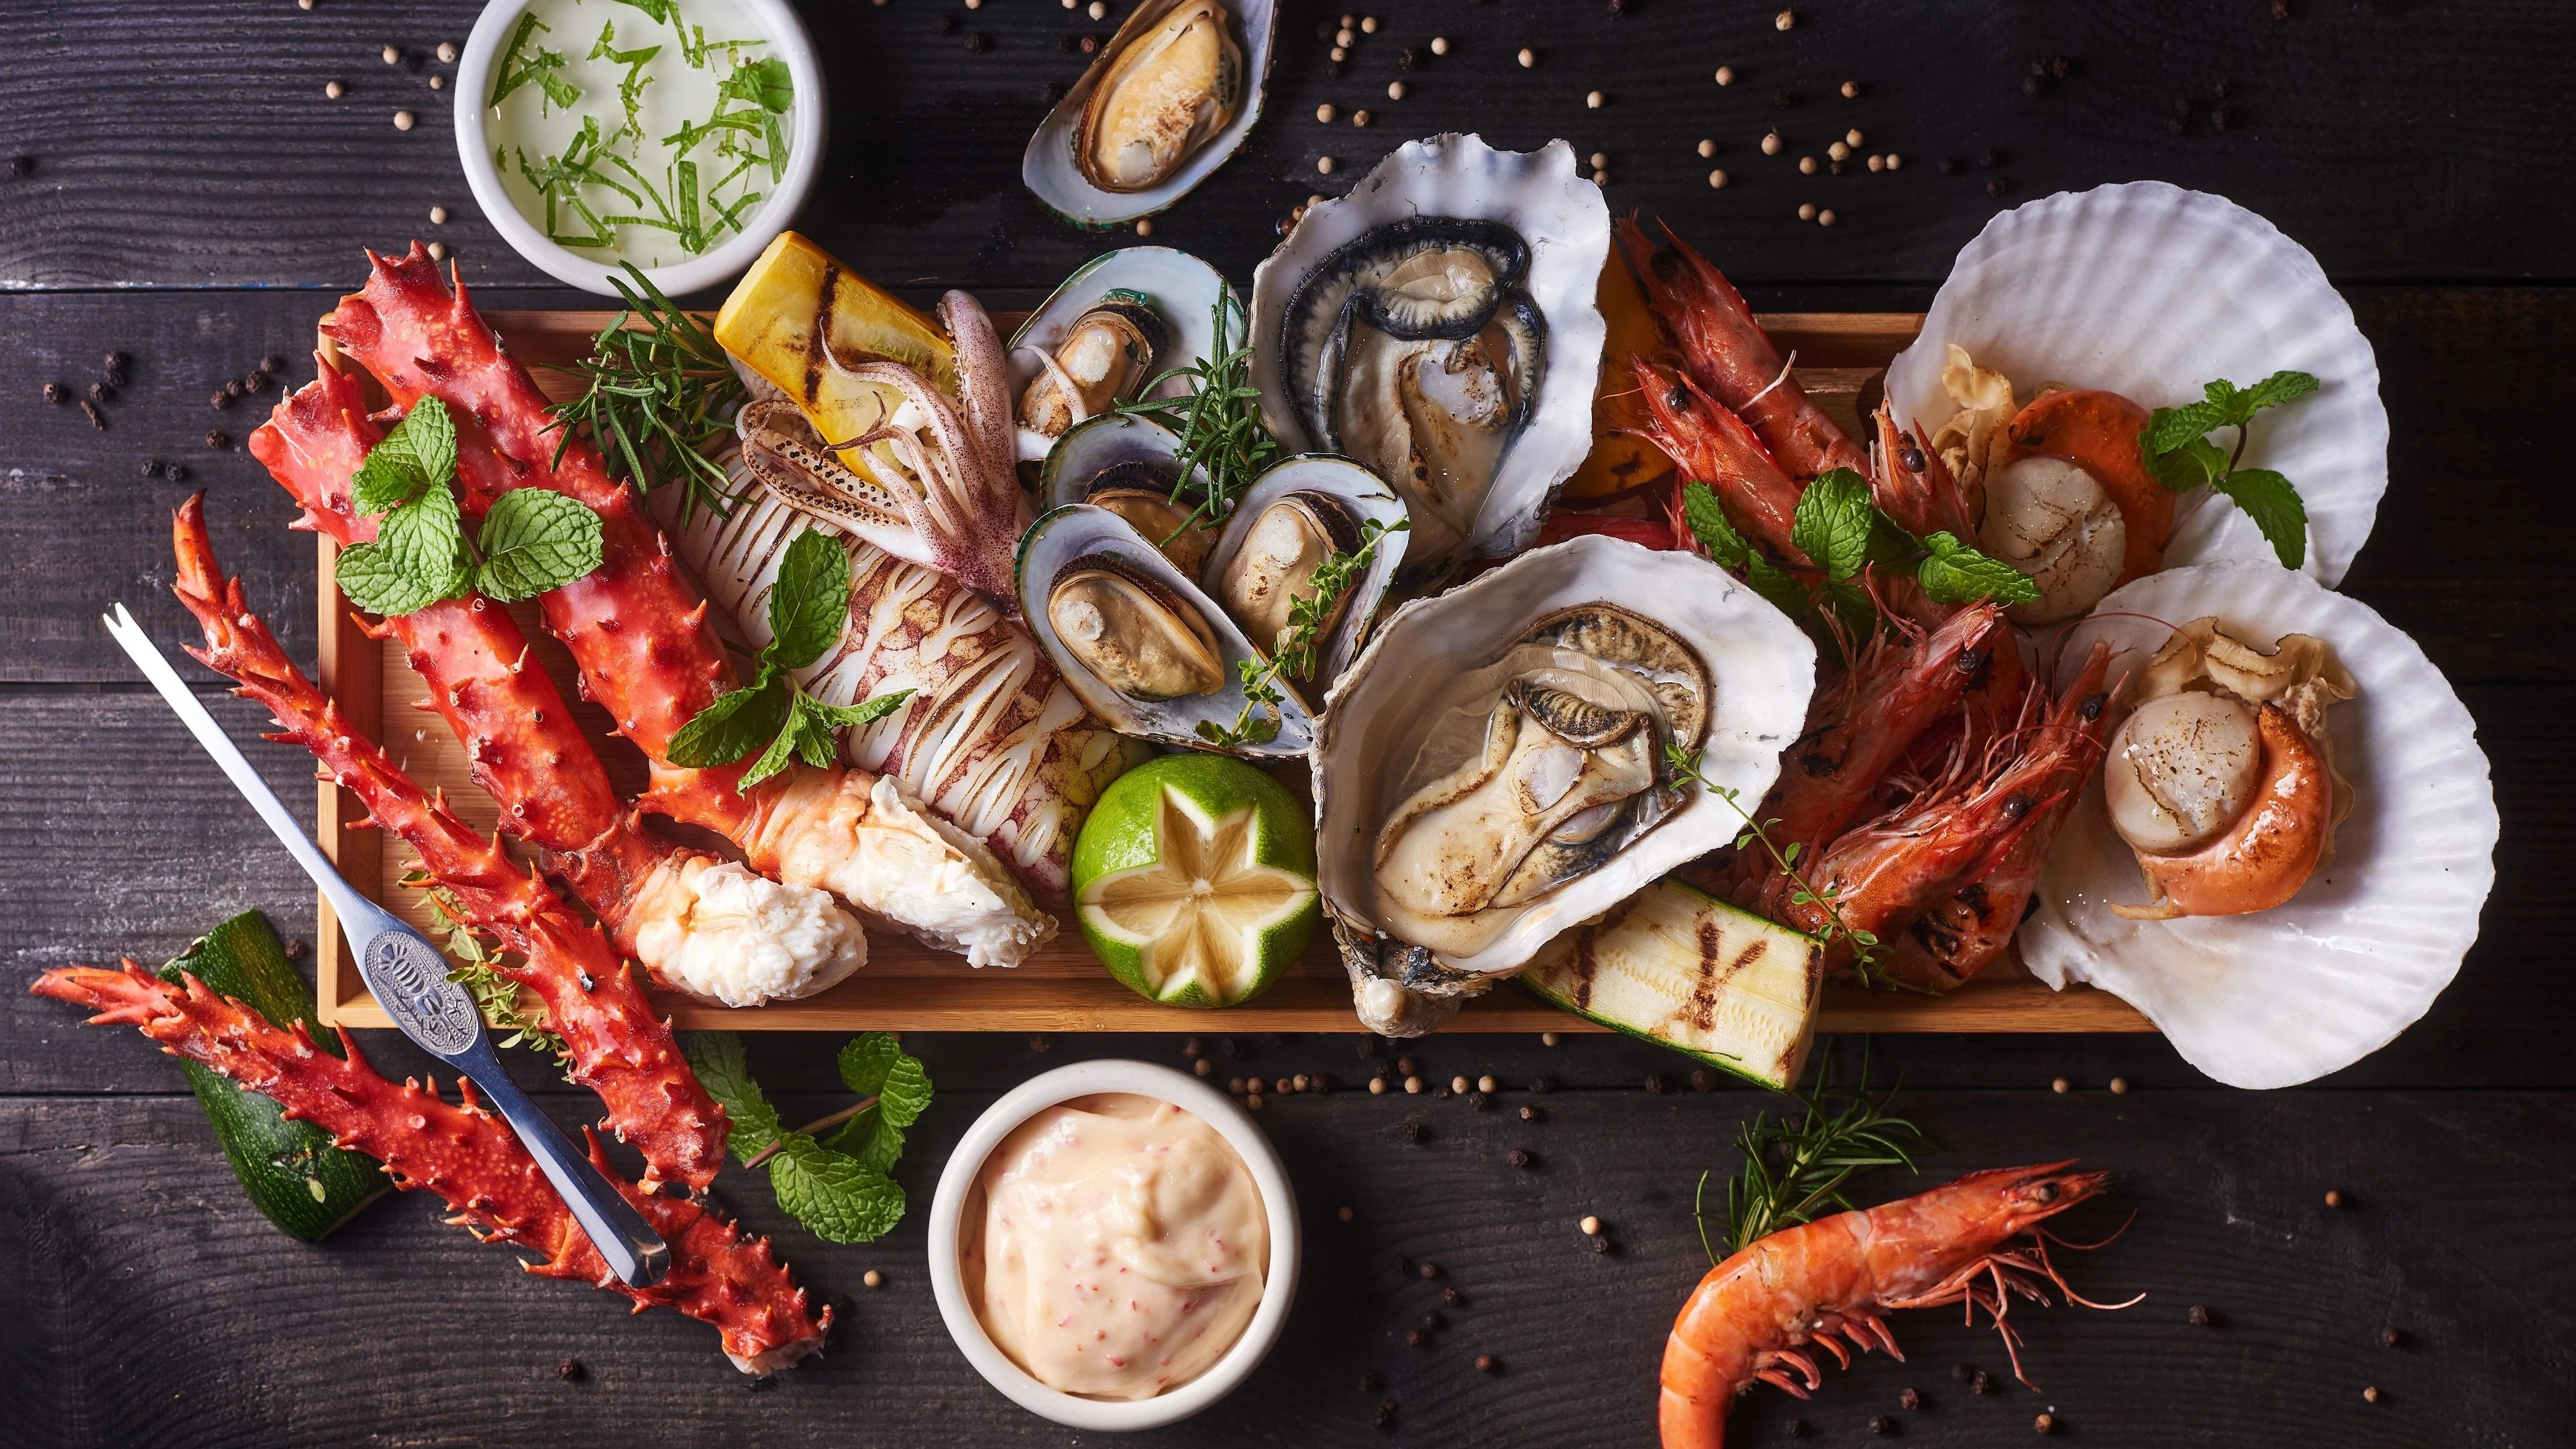 Seafood wallpapers, High-quality visuals, Captivating backgrounds, Gastronomic inspiration, 3840x2160 4K Desktop